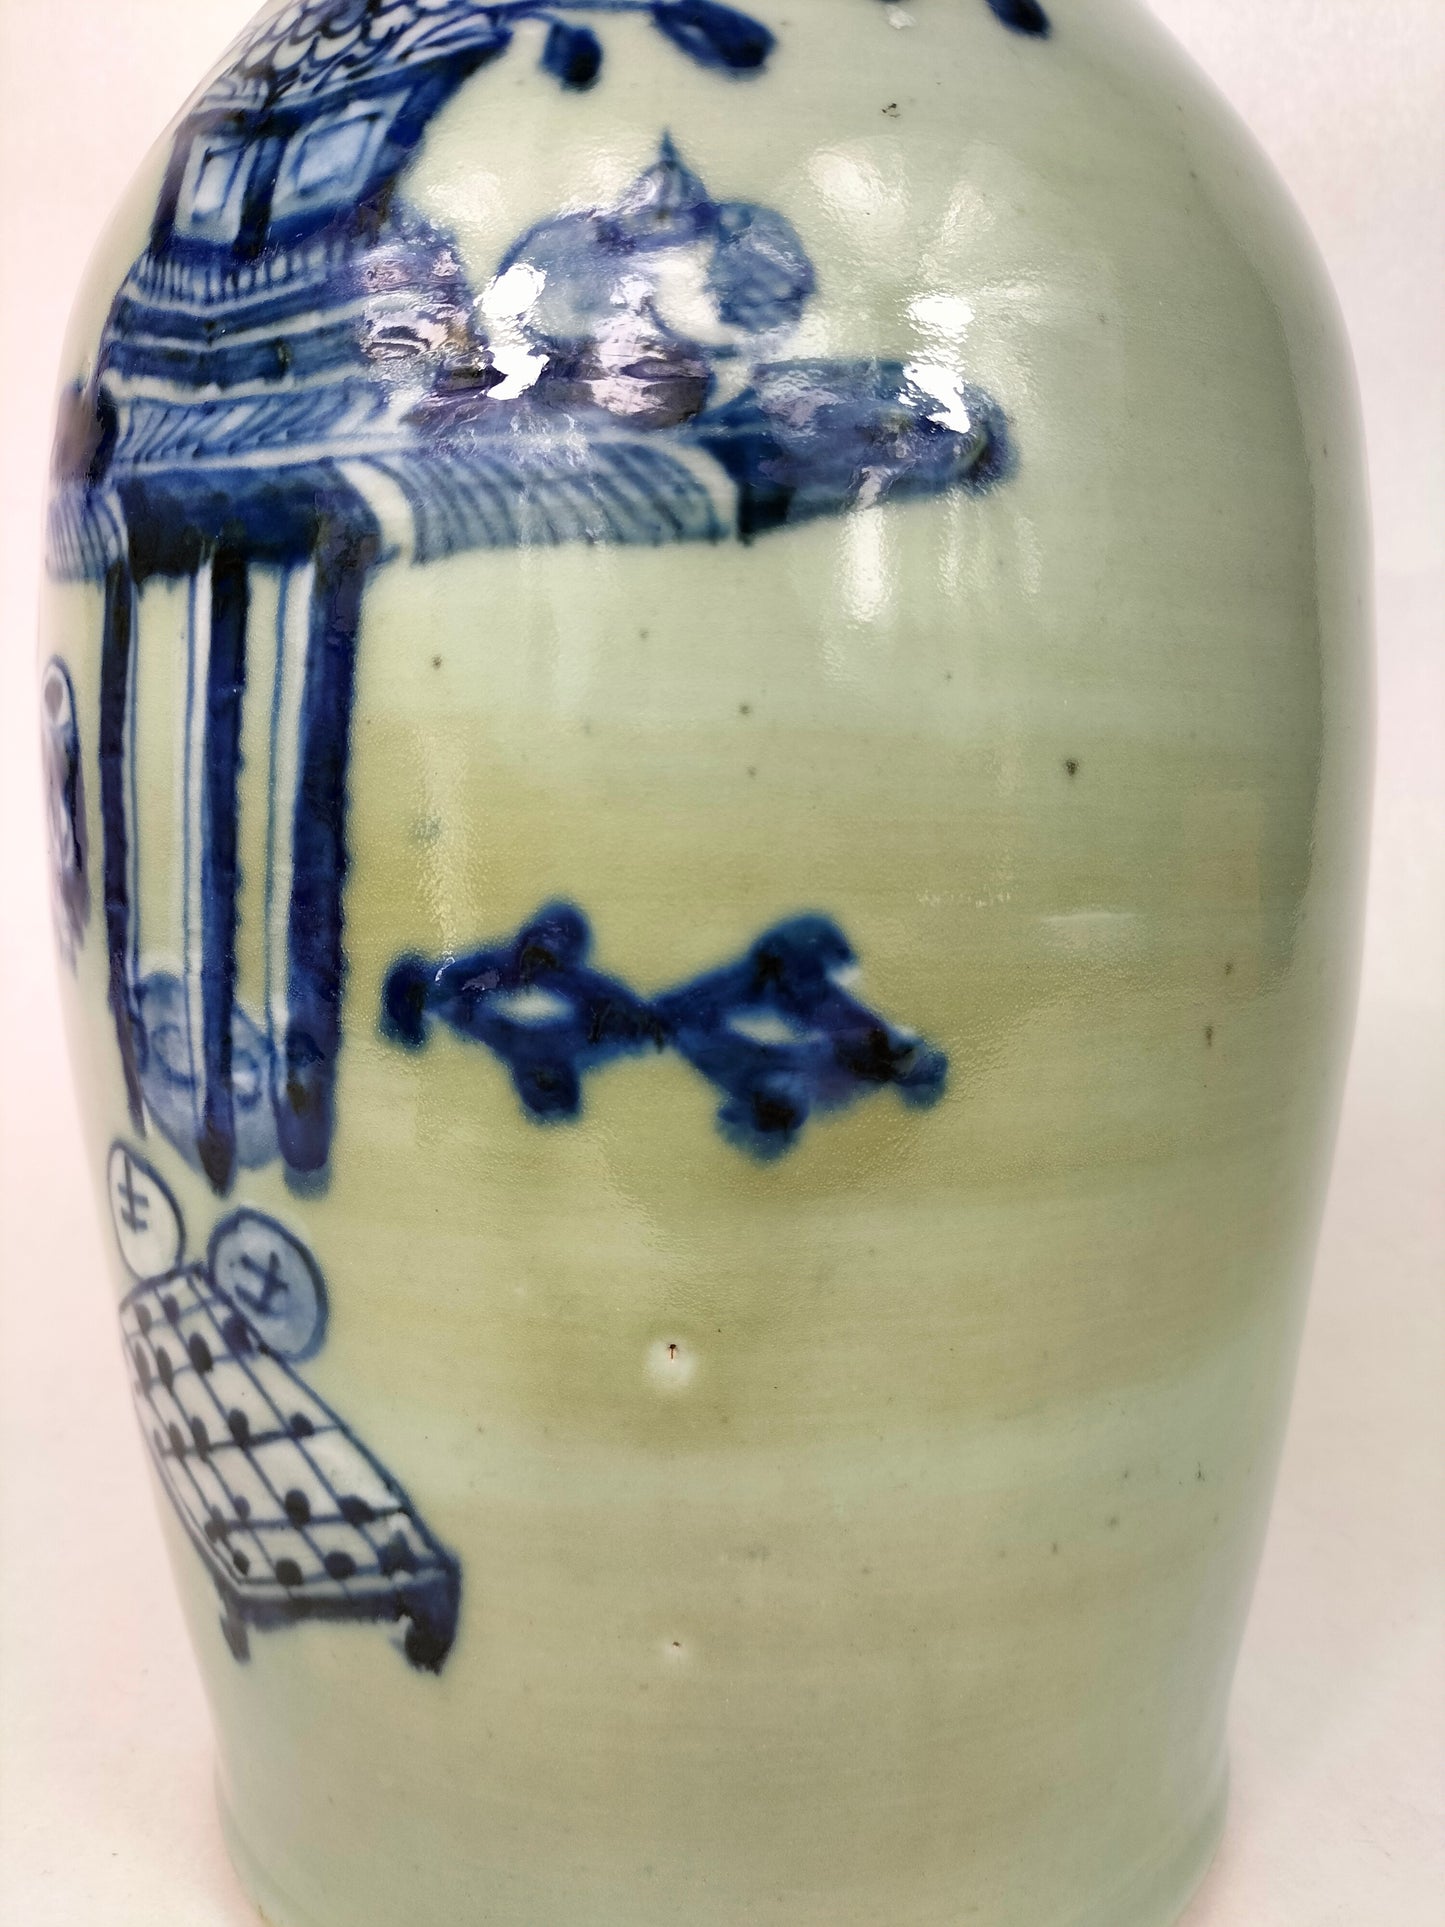 Antique Chinese celadon vase decorated with antiquities // Qing Dynasty - 19th century